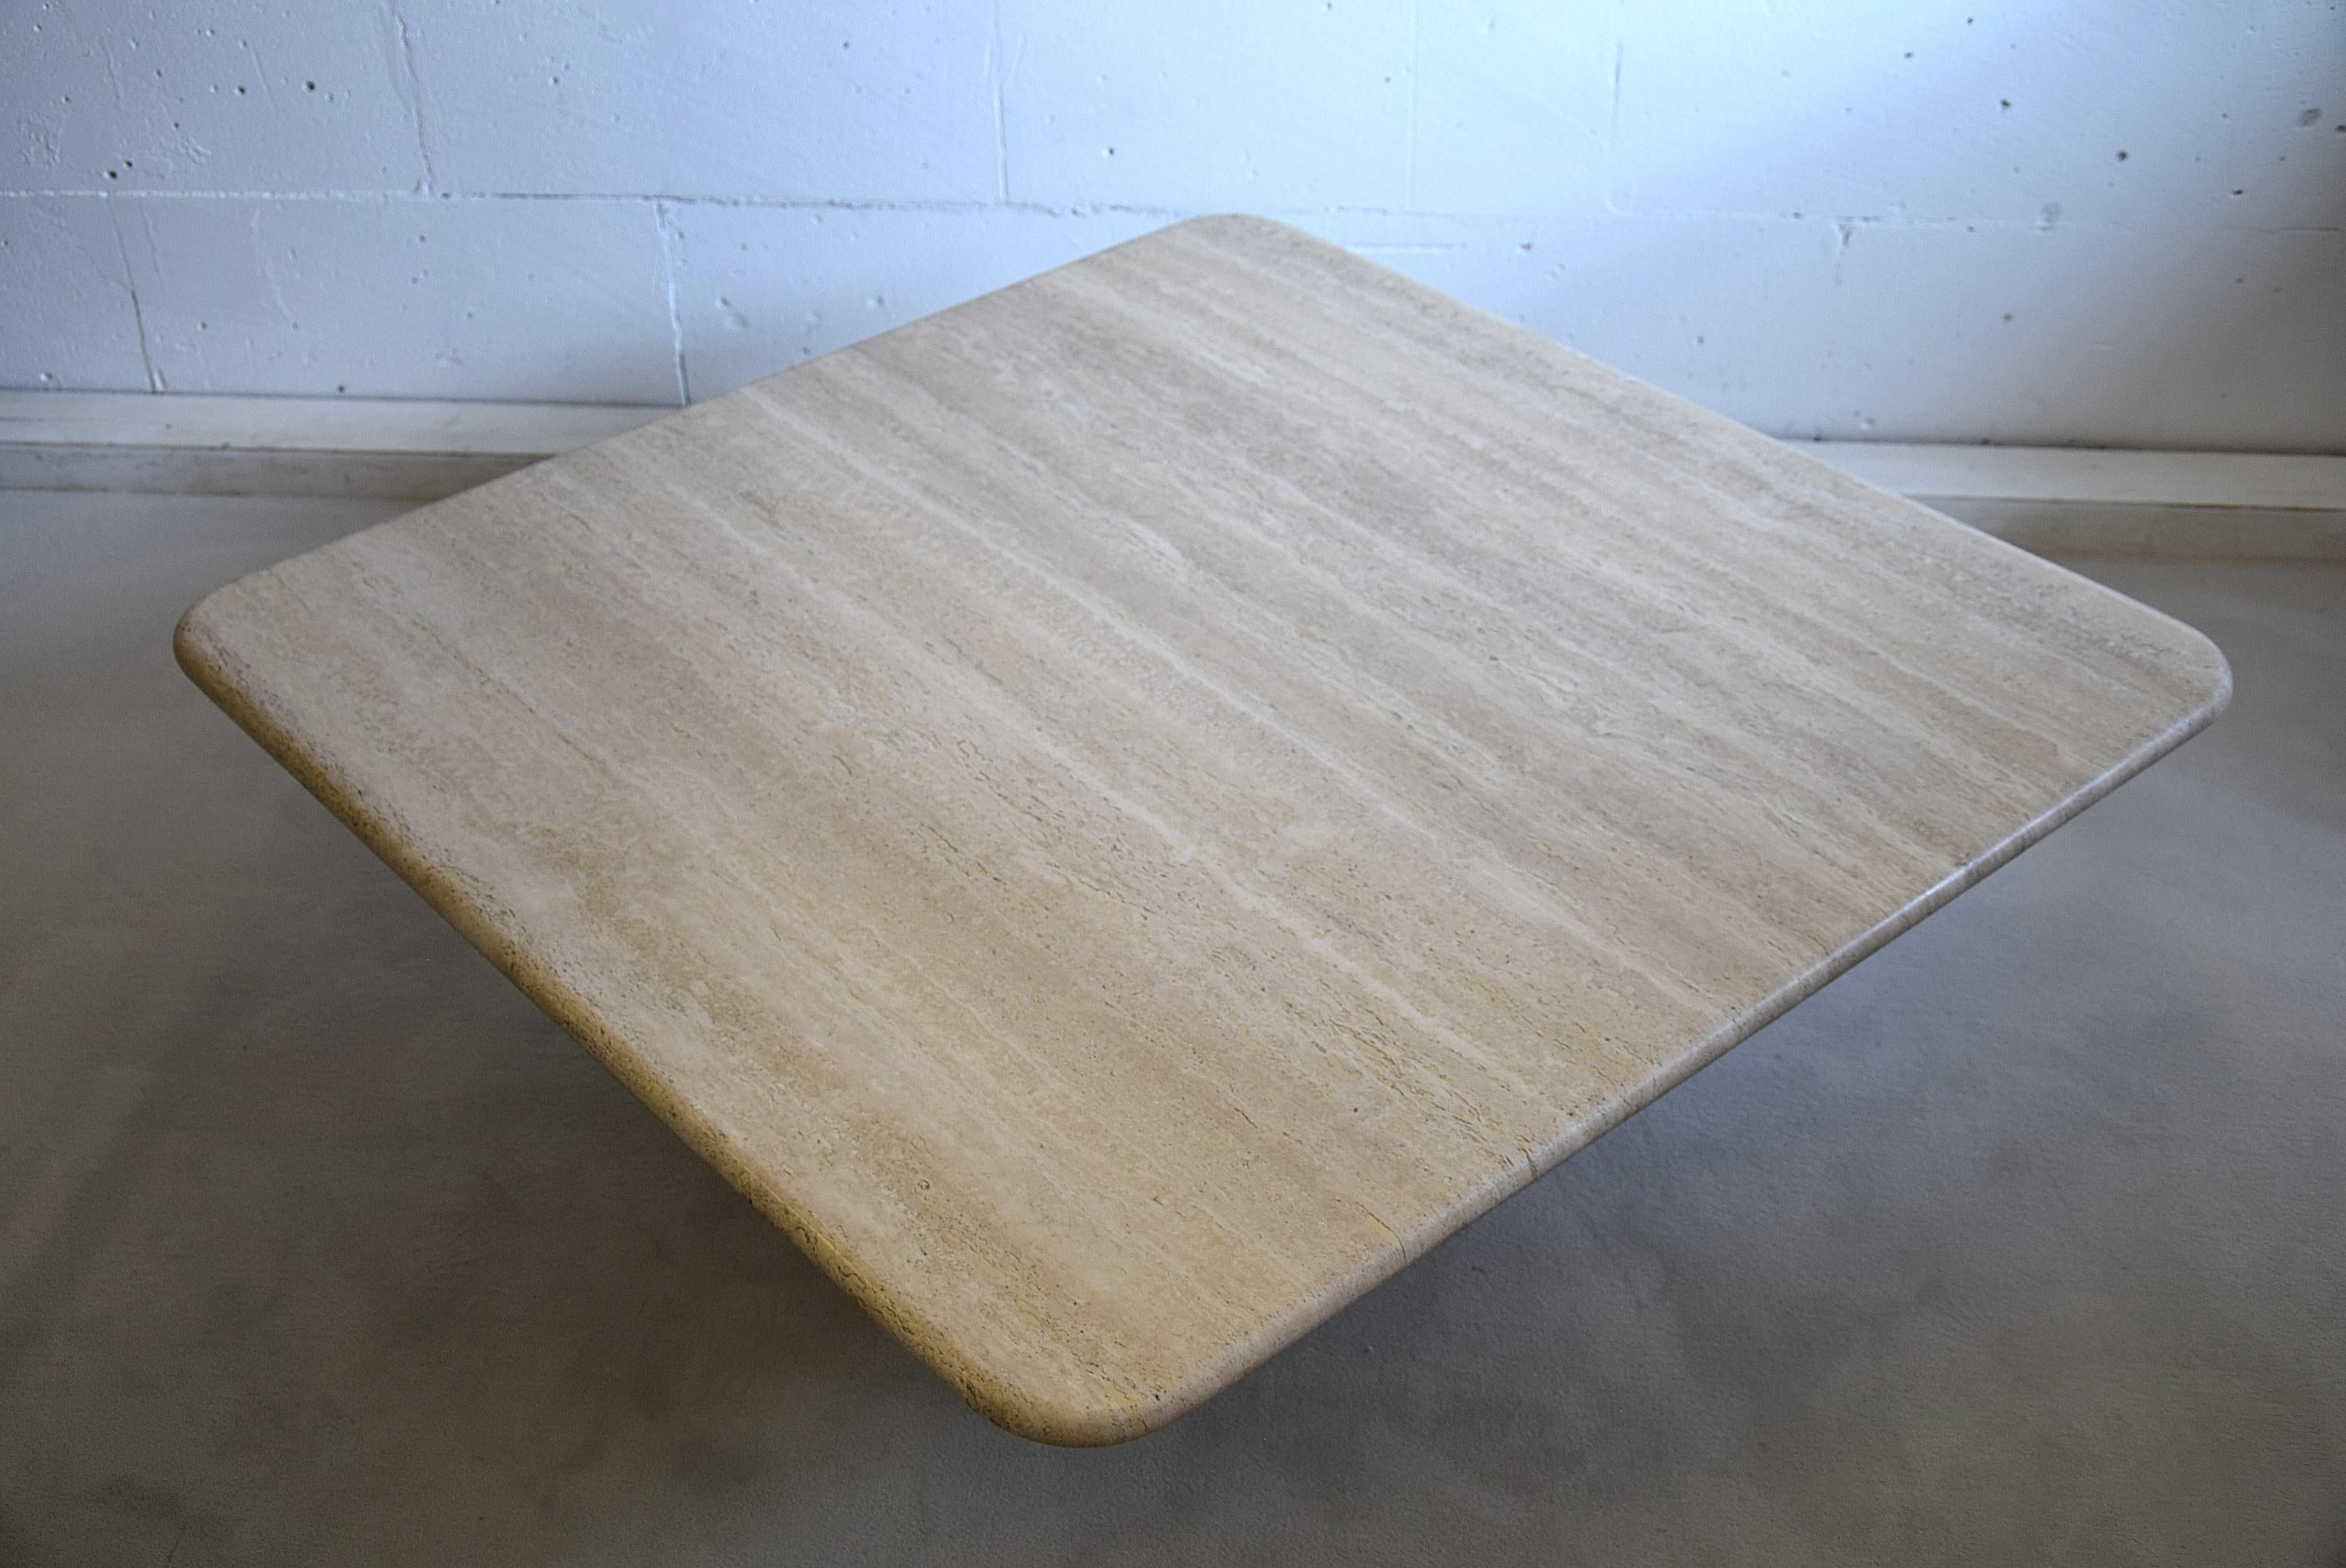 Mid-Century Modern Travertine side table in great condition. This elegant and sophisticated piece has no damage.
The table will be shipped abroad in a custom made wooden crate. Cost of transport to the US crate included is Euro 1250.
Travertine is a